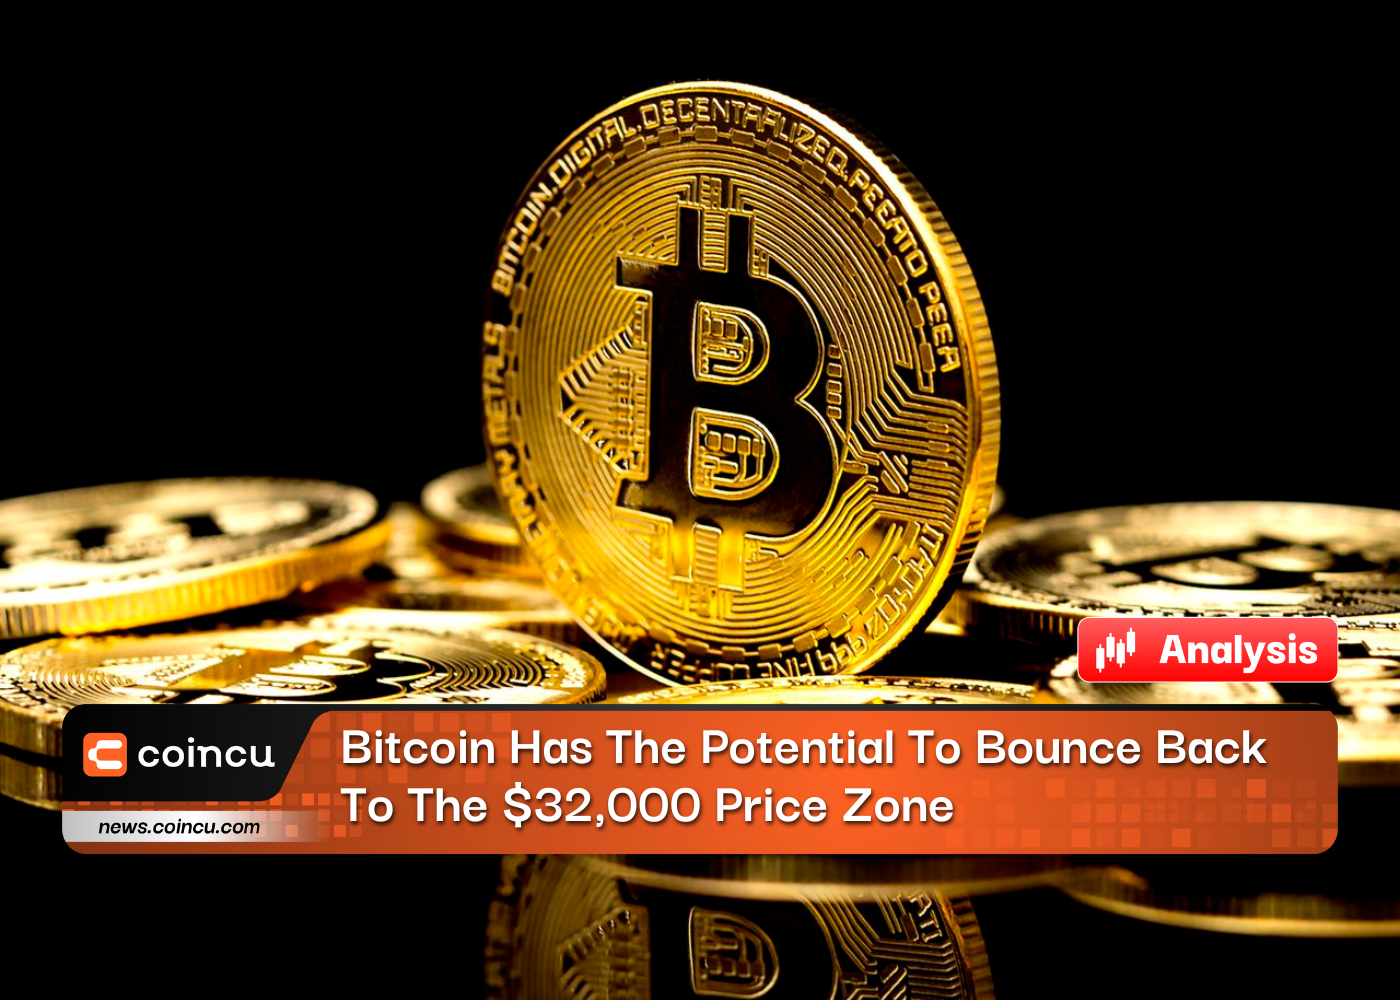 Bitcoin Has The Potential To Bounce Back To The $32,000 Price Zone